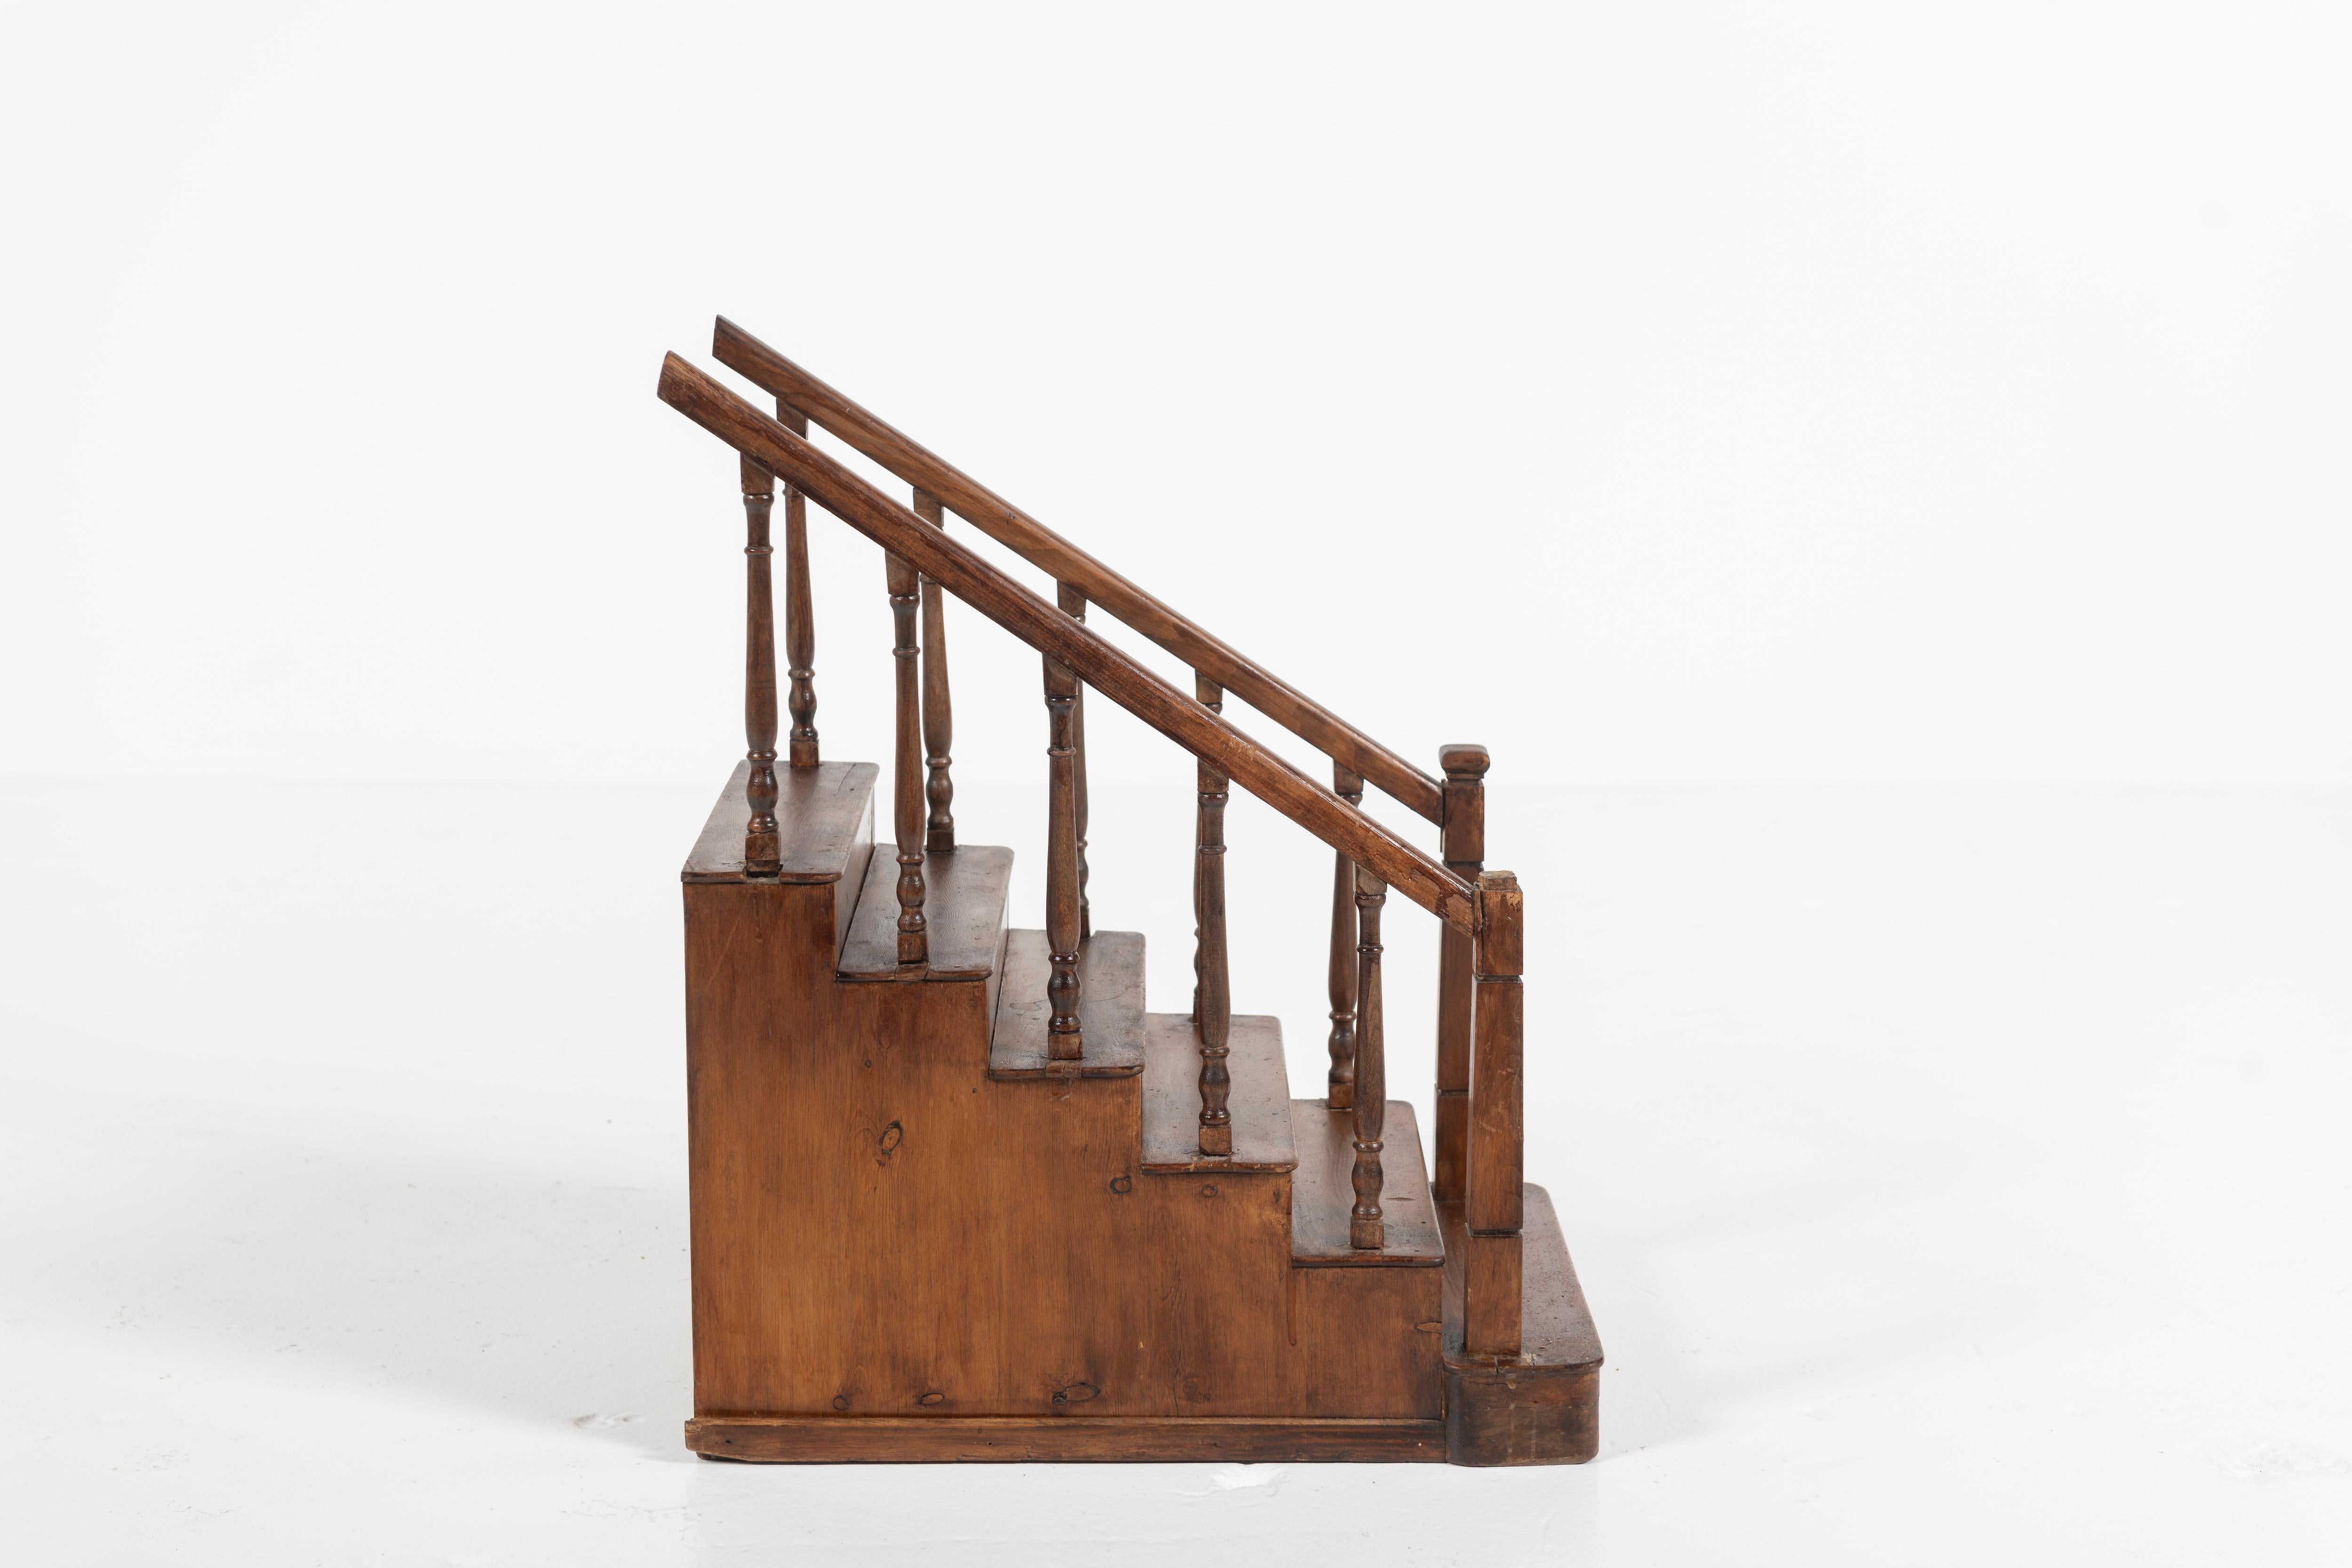 This lovely diminutive English staircase model from the 1920's is certain to add interest to doll houses and playlands of every scale. The model is of traditional design and carved of walnut.